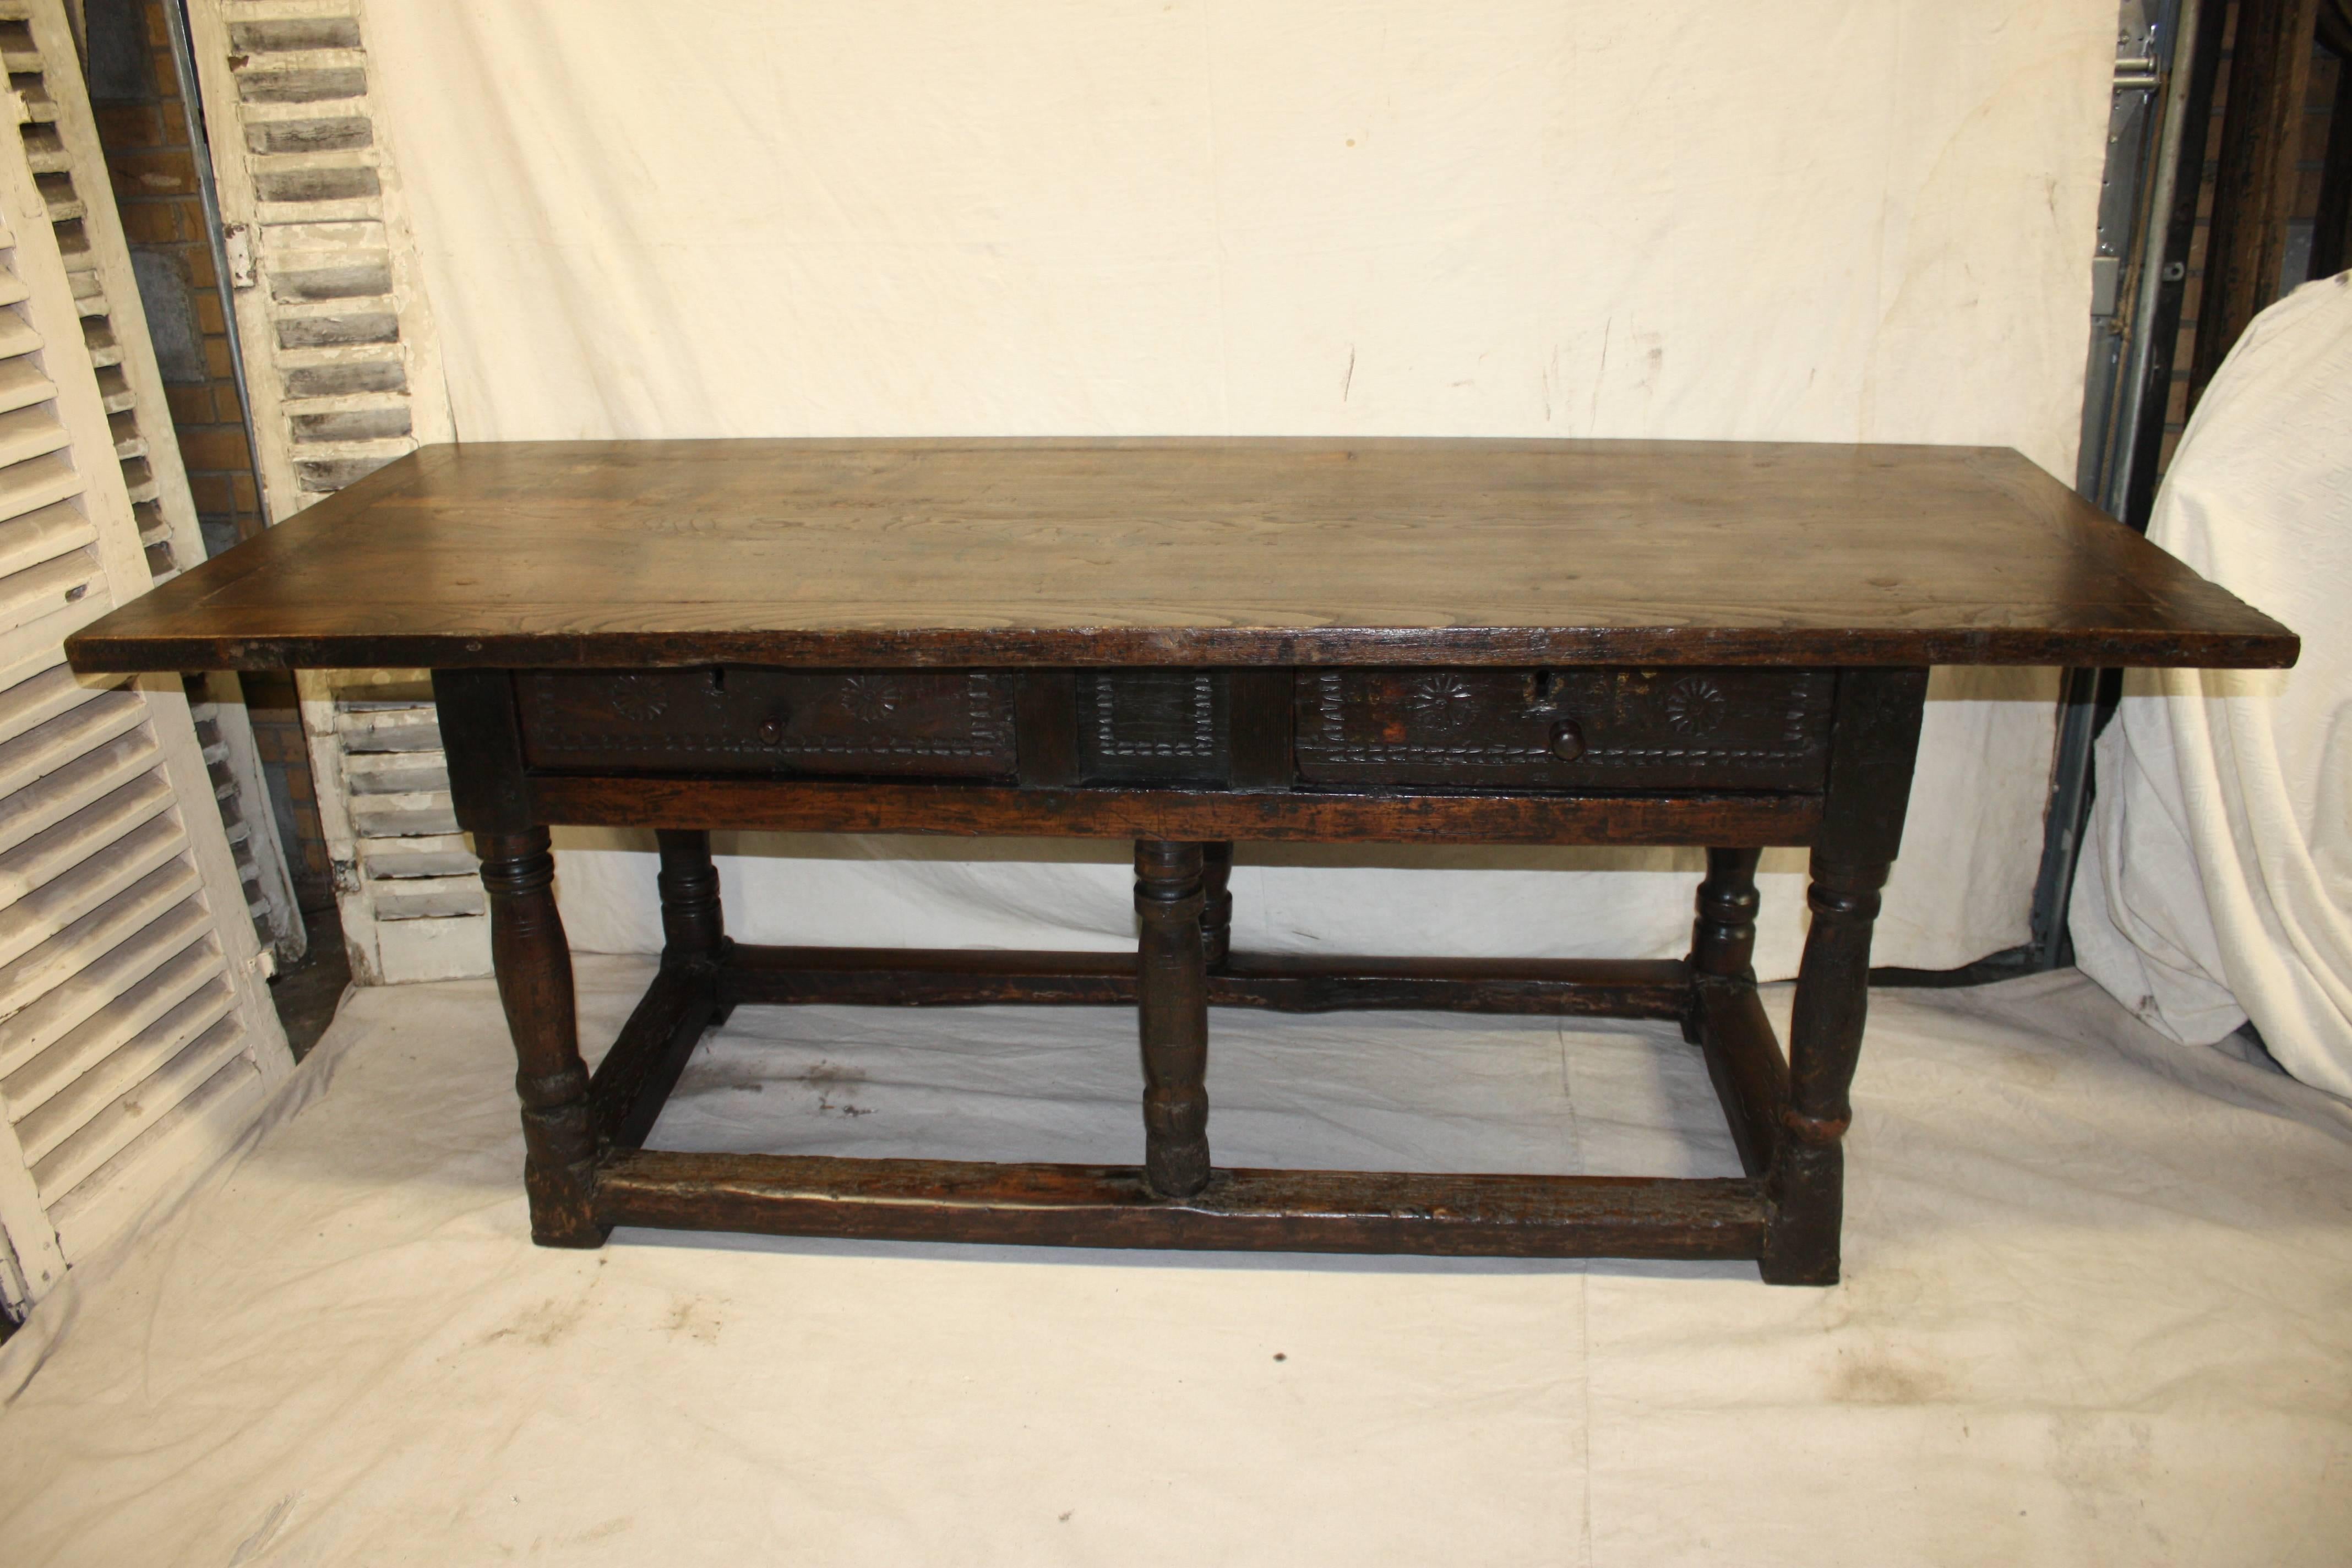 17th century French table, it can be used as a console too.